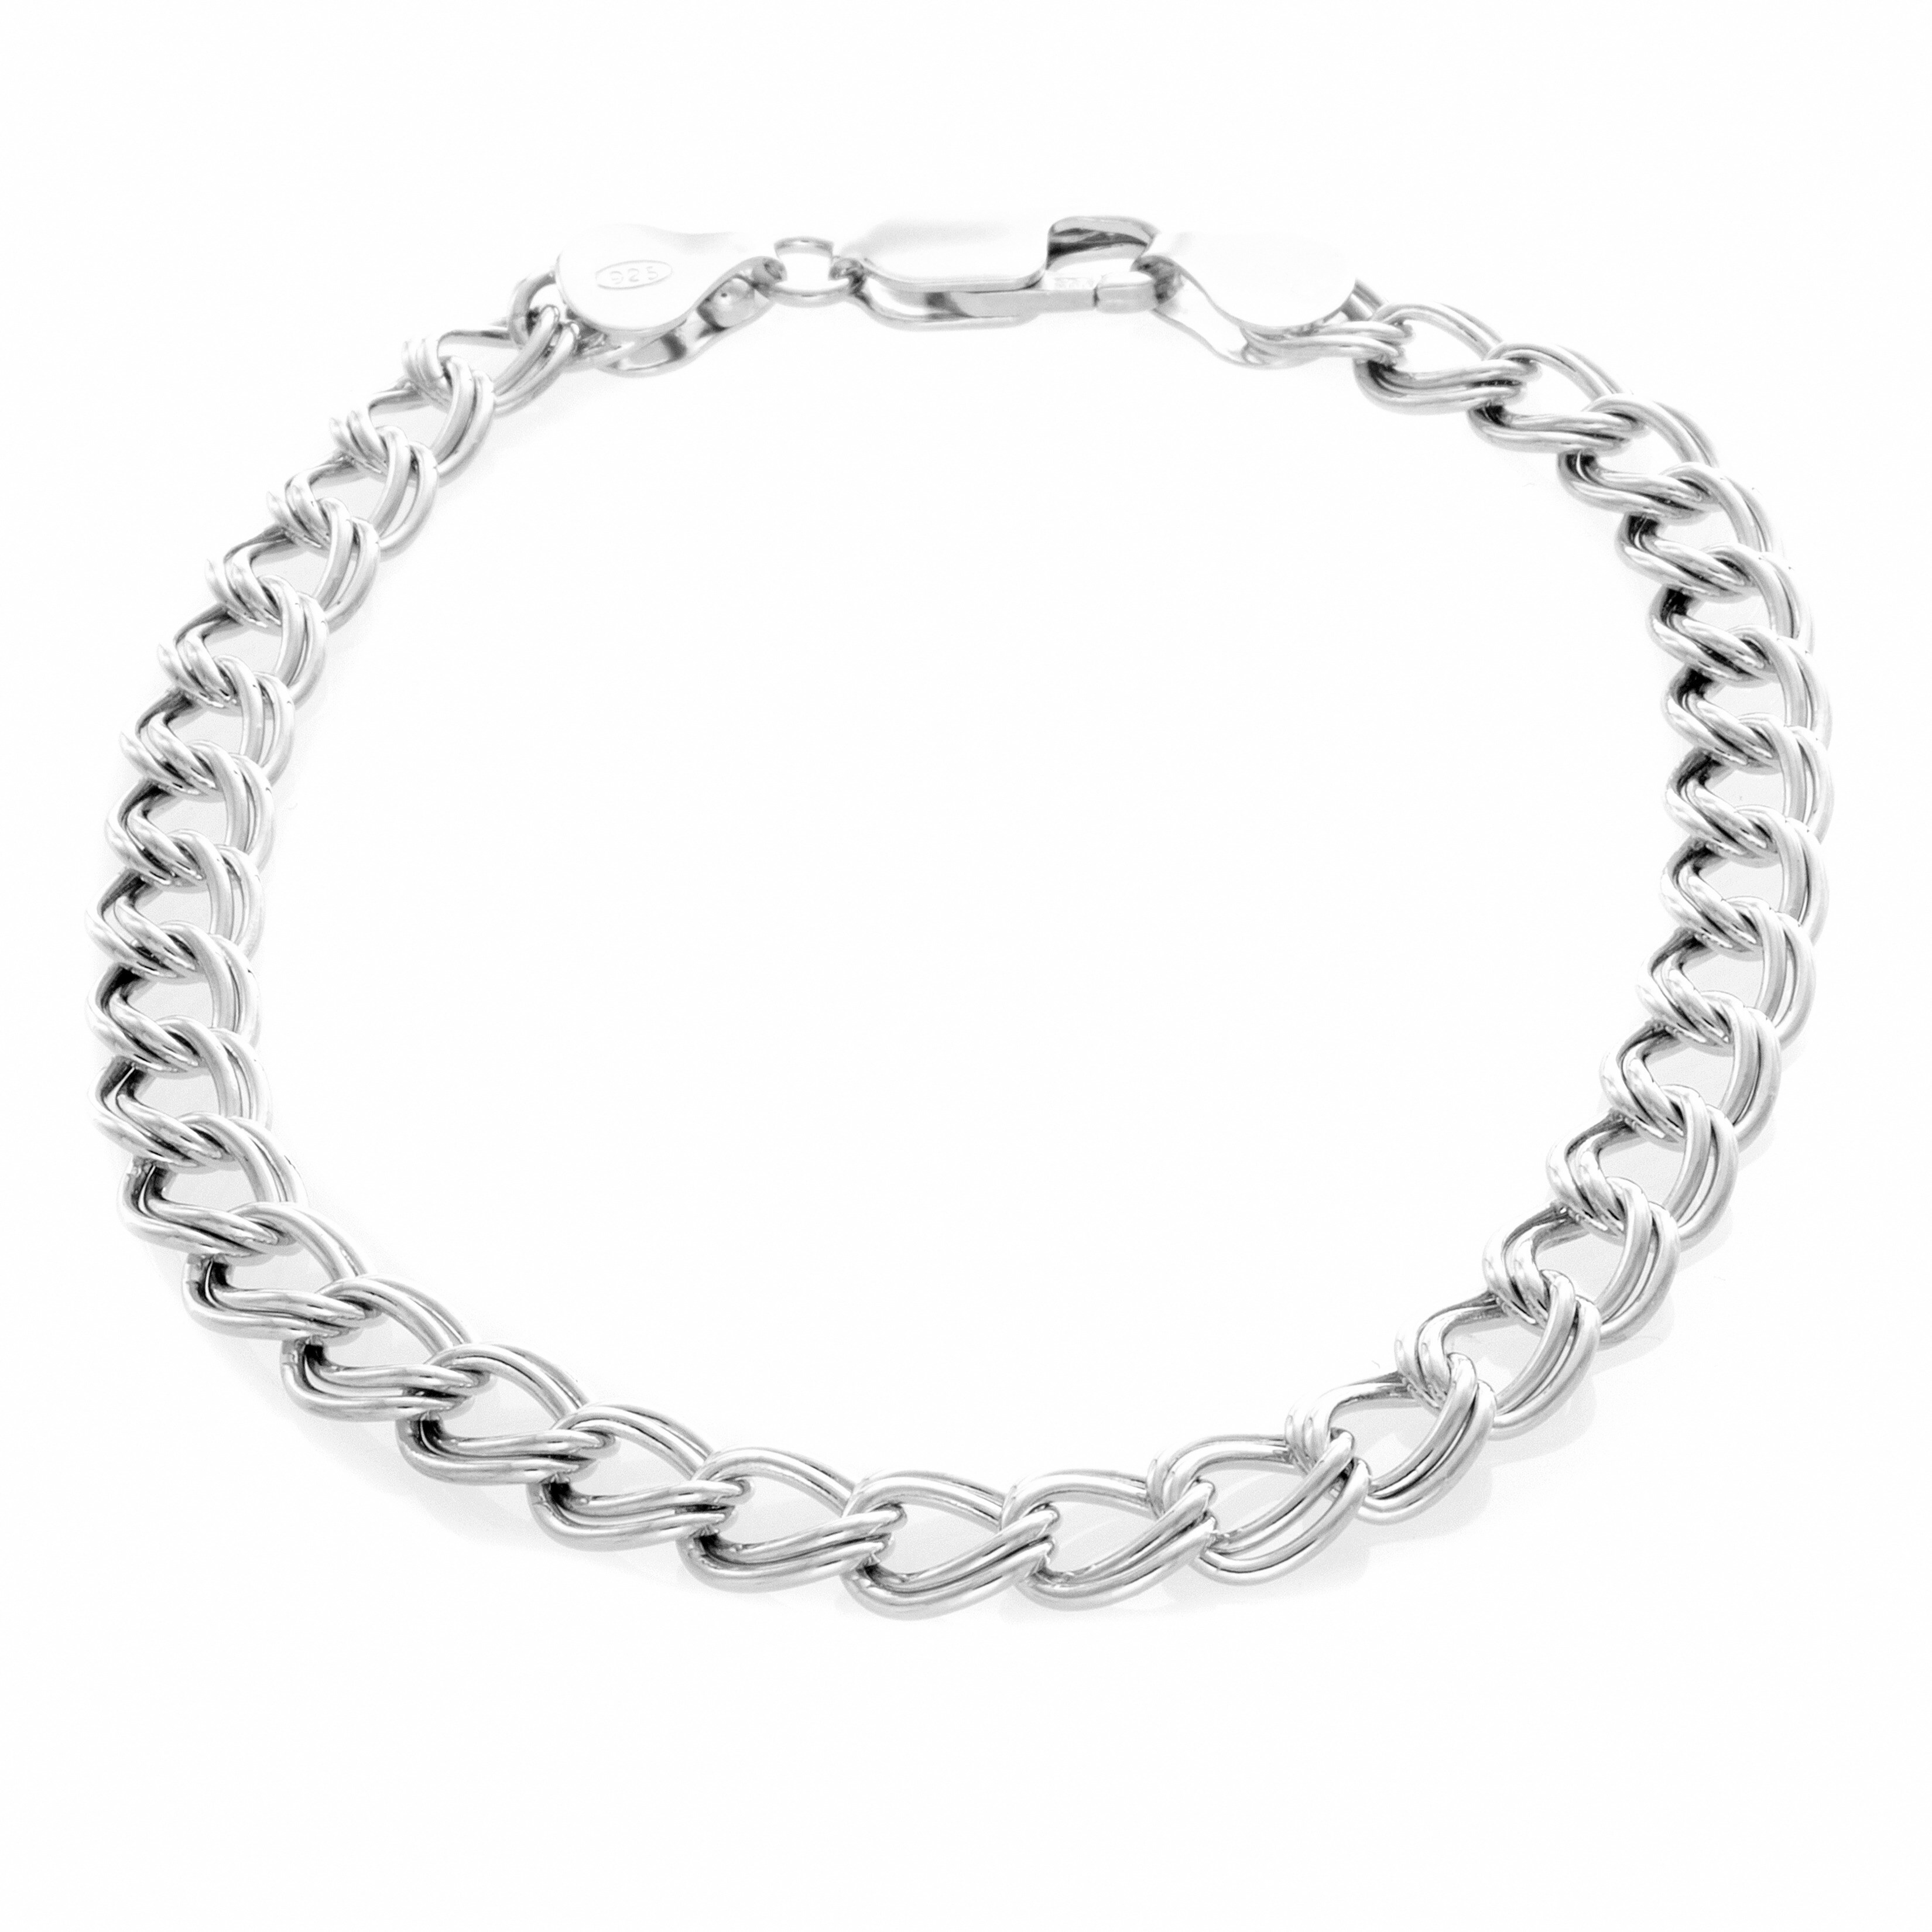 Shop Sterling Essentials Sterling Silver 7-inch Classic Charm Bracelet